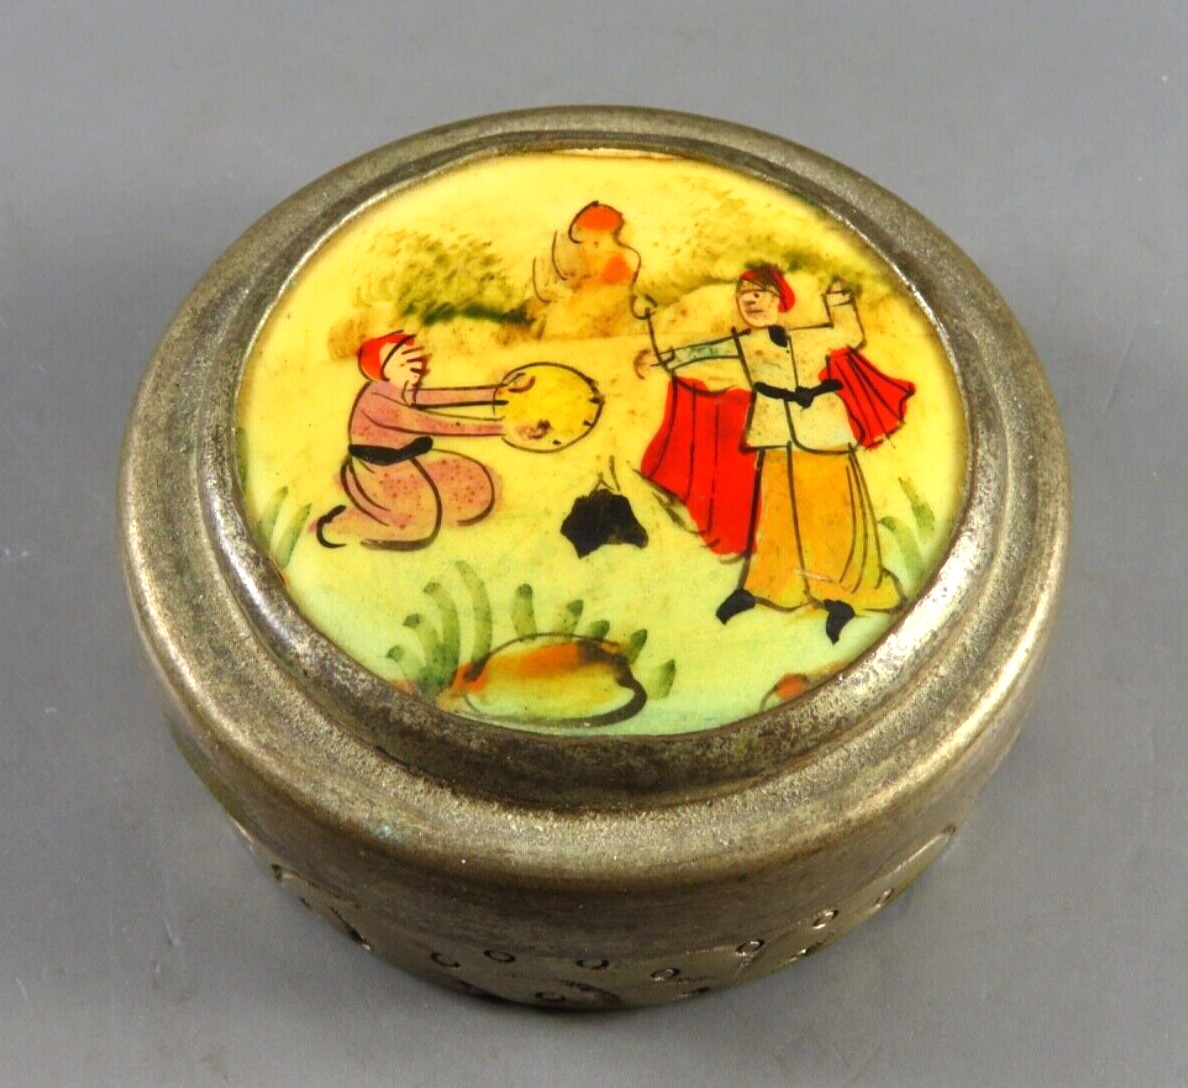 ANTIQUE/VTG Silver Metal ISLAMIC MIDDLE EAST Pill Snuff Box HAND PAINTED SCENE